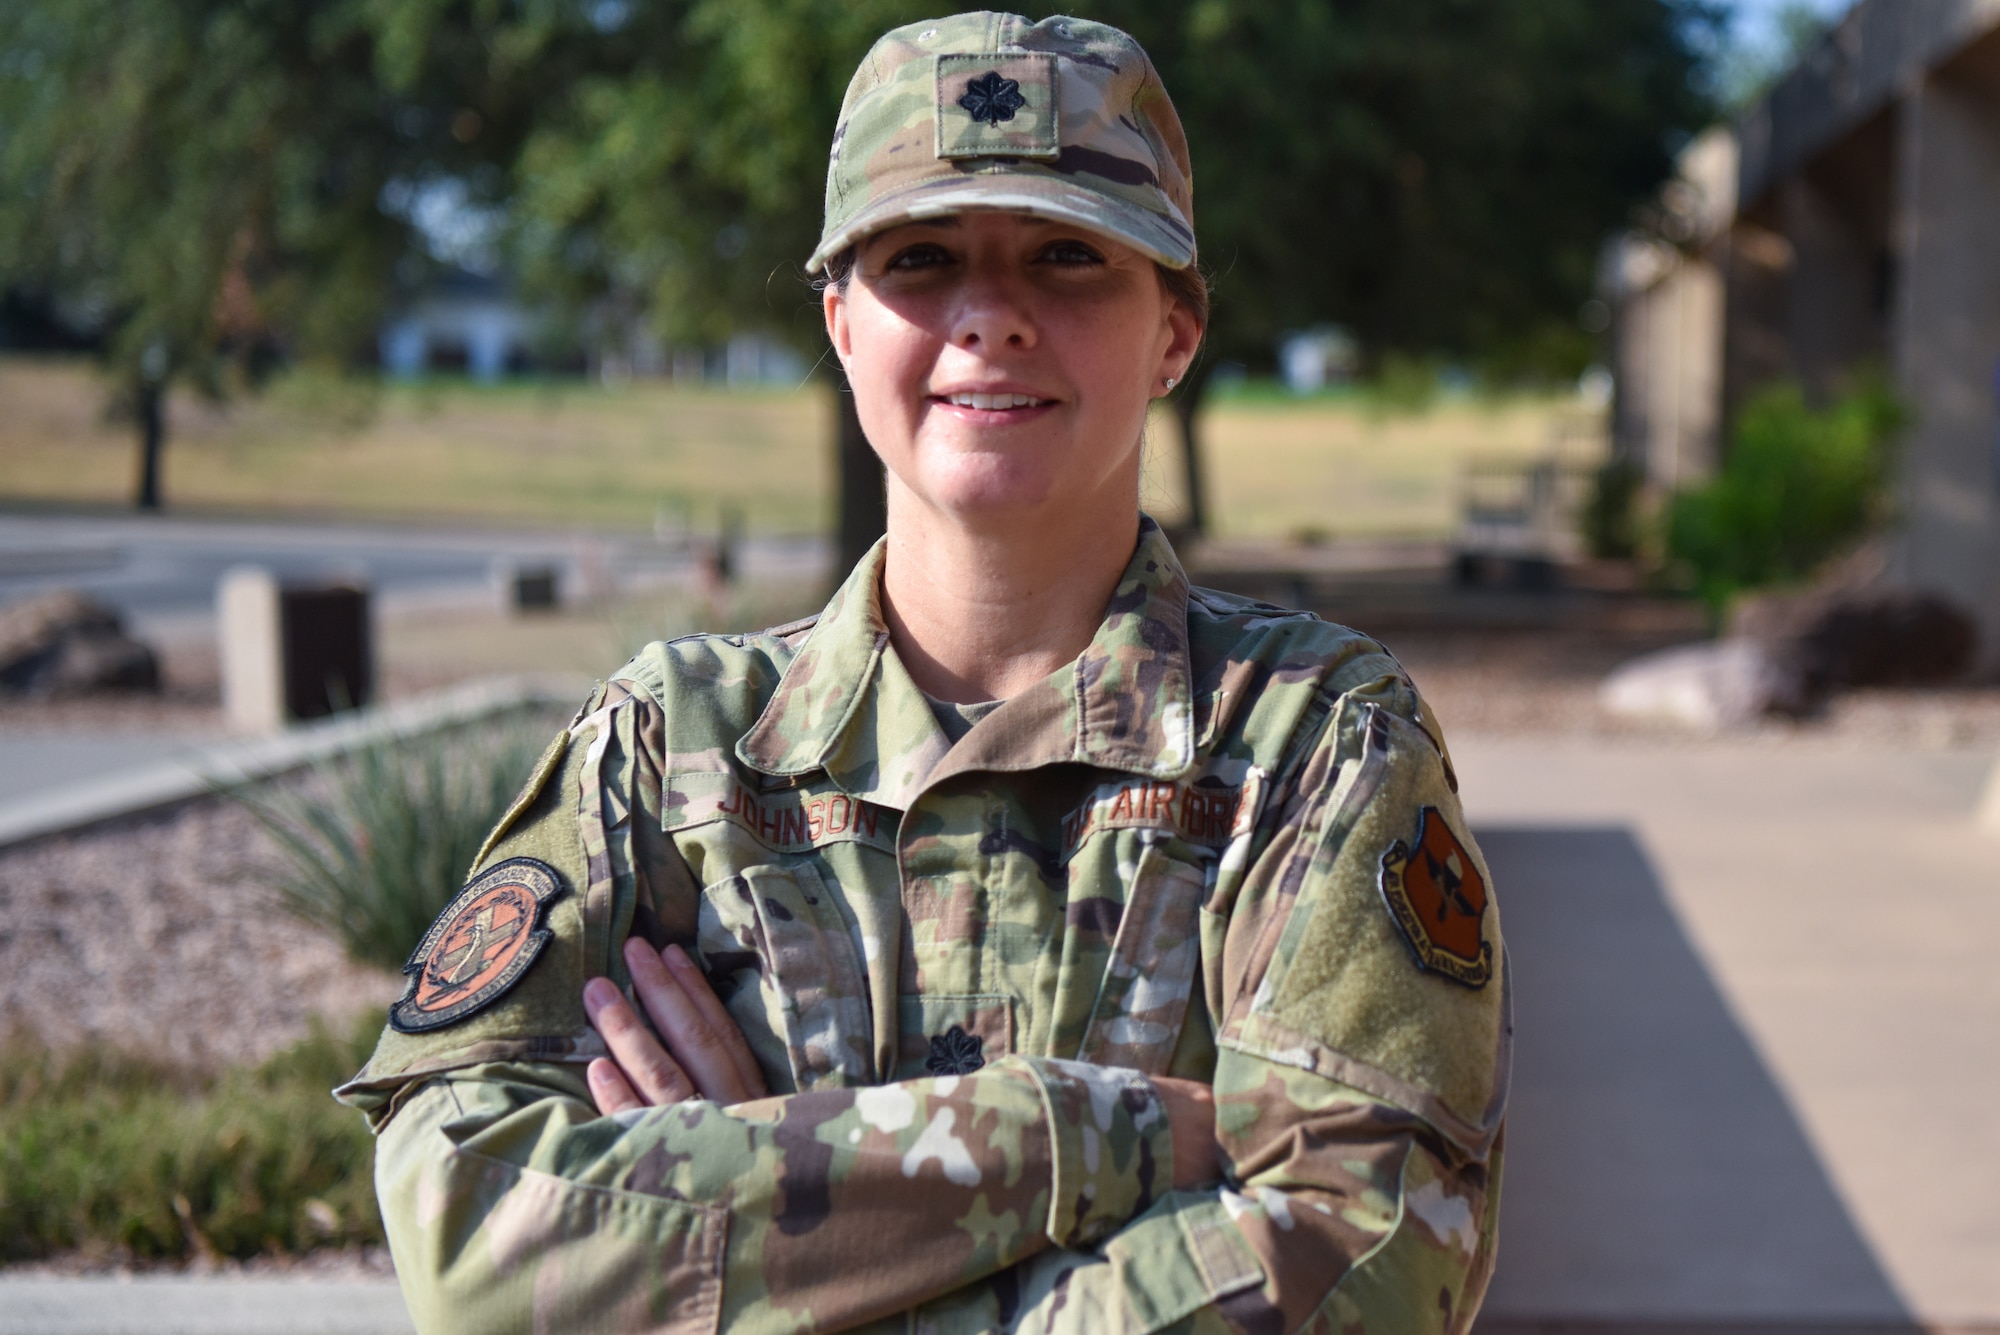 U.S. Air Force Lt. Col. Jennifer Johnson, 17th Healthcare Operations Squadron commander, poses for a photo, Goodfellow Air Force Base, Texas, Jul 14, 2022. Johnson took command of the 17th HCOS on June 10. (U.S. Air Force photo by Staff Sergeant Jermaine Ayers)